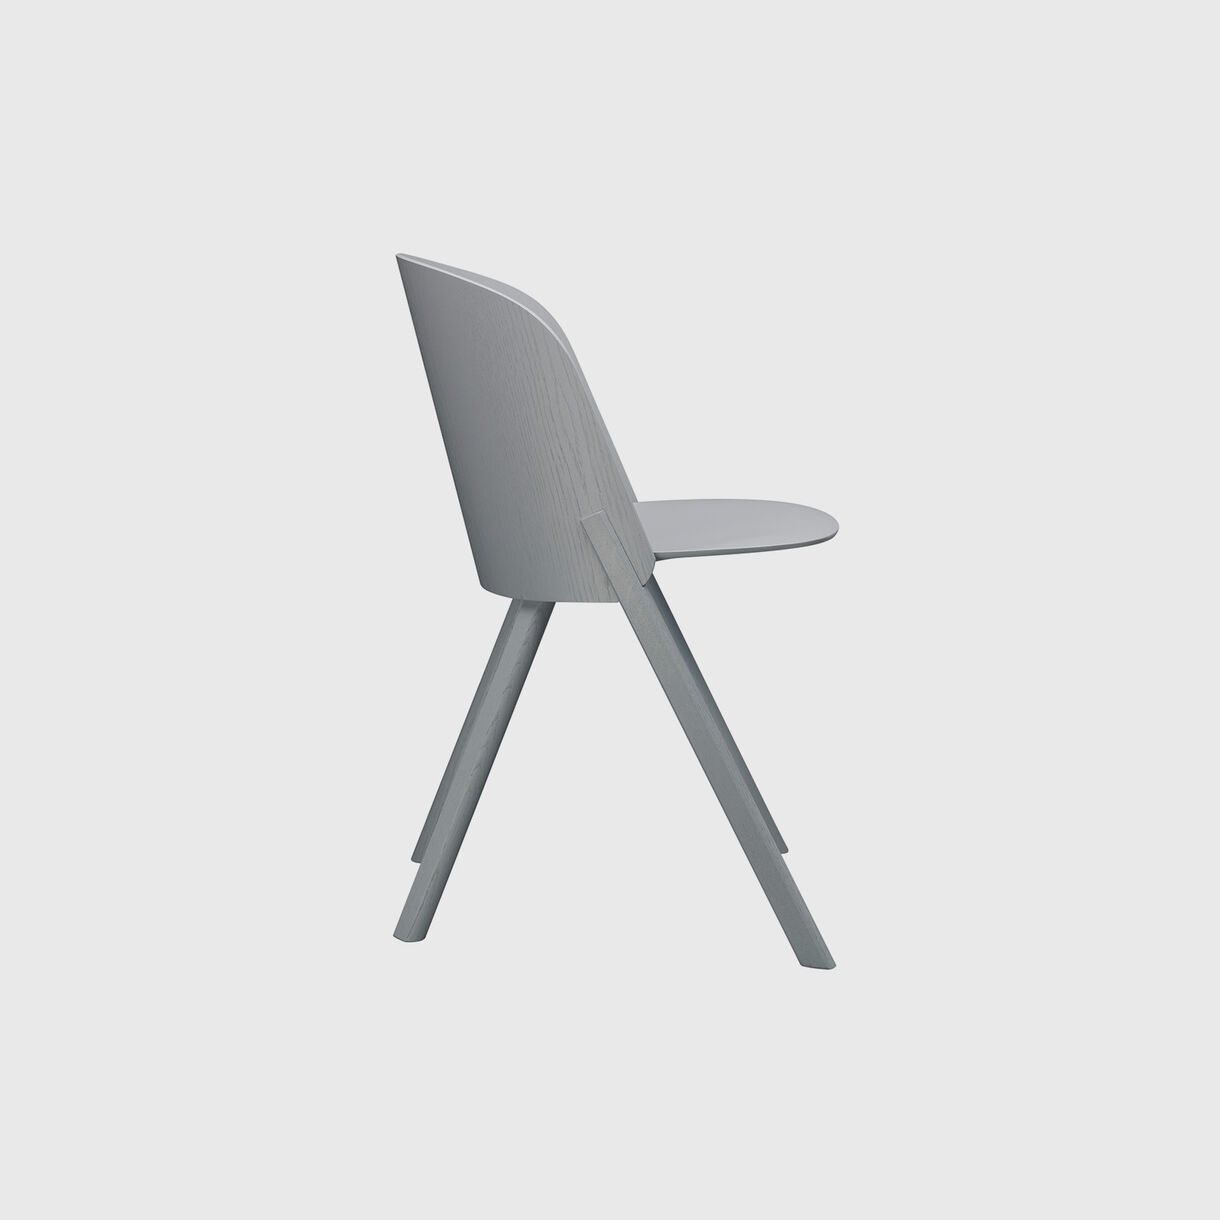 This Chair, Traffic Grey